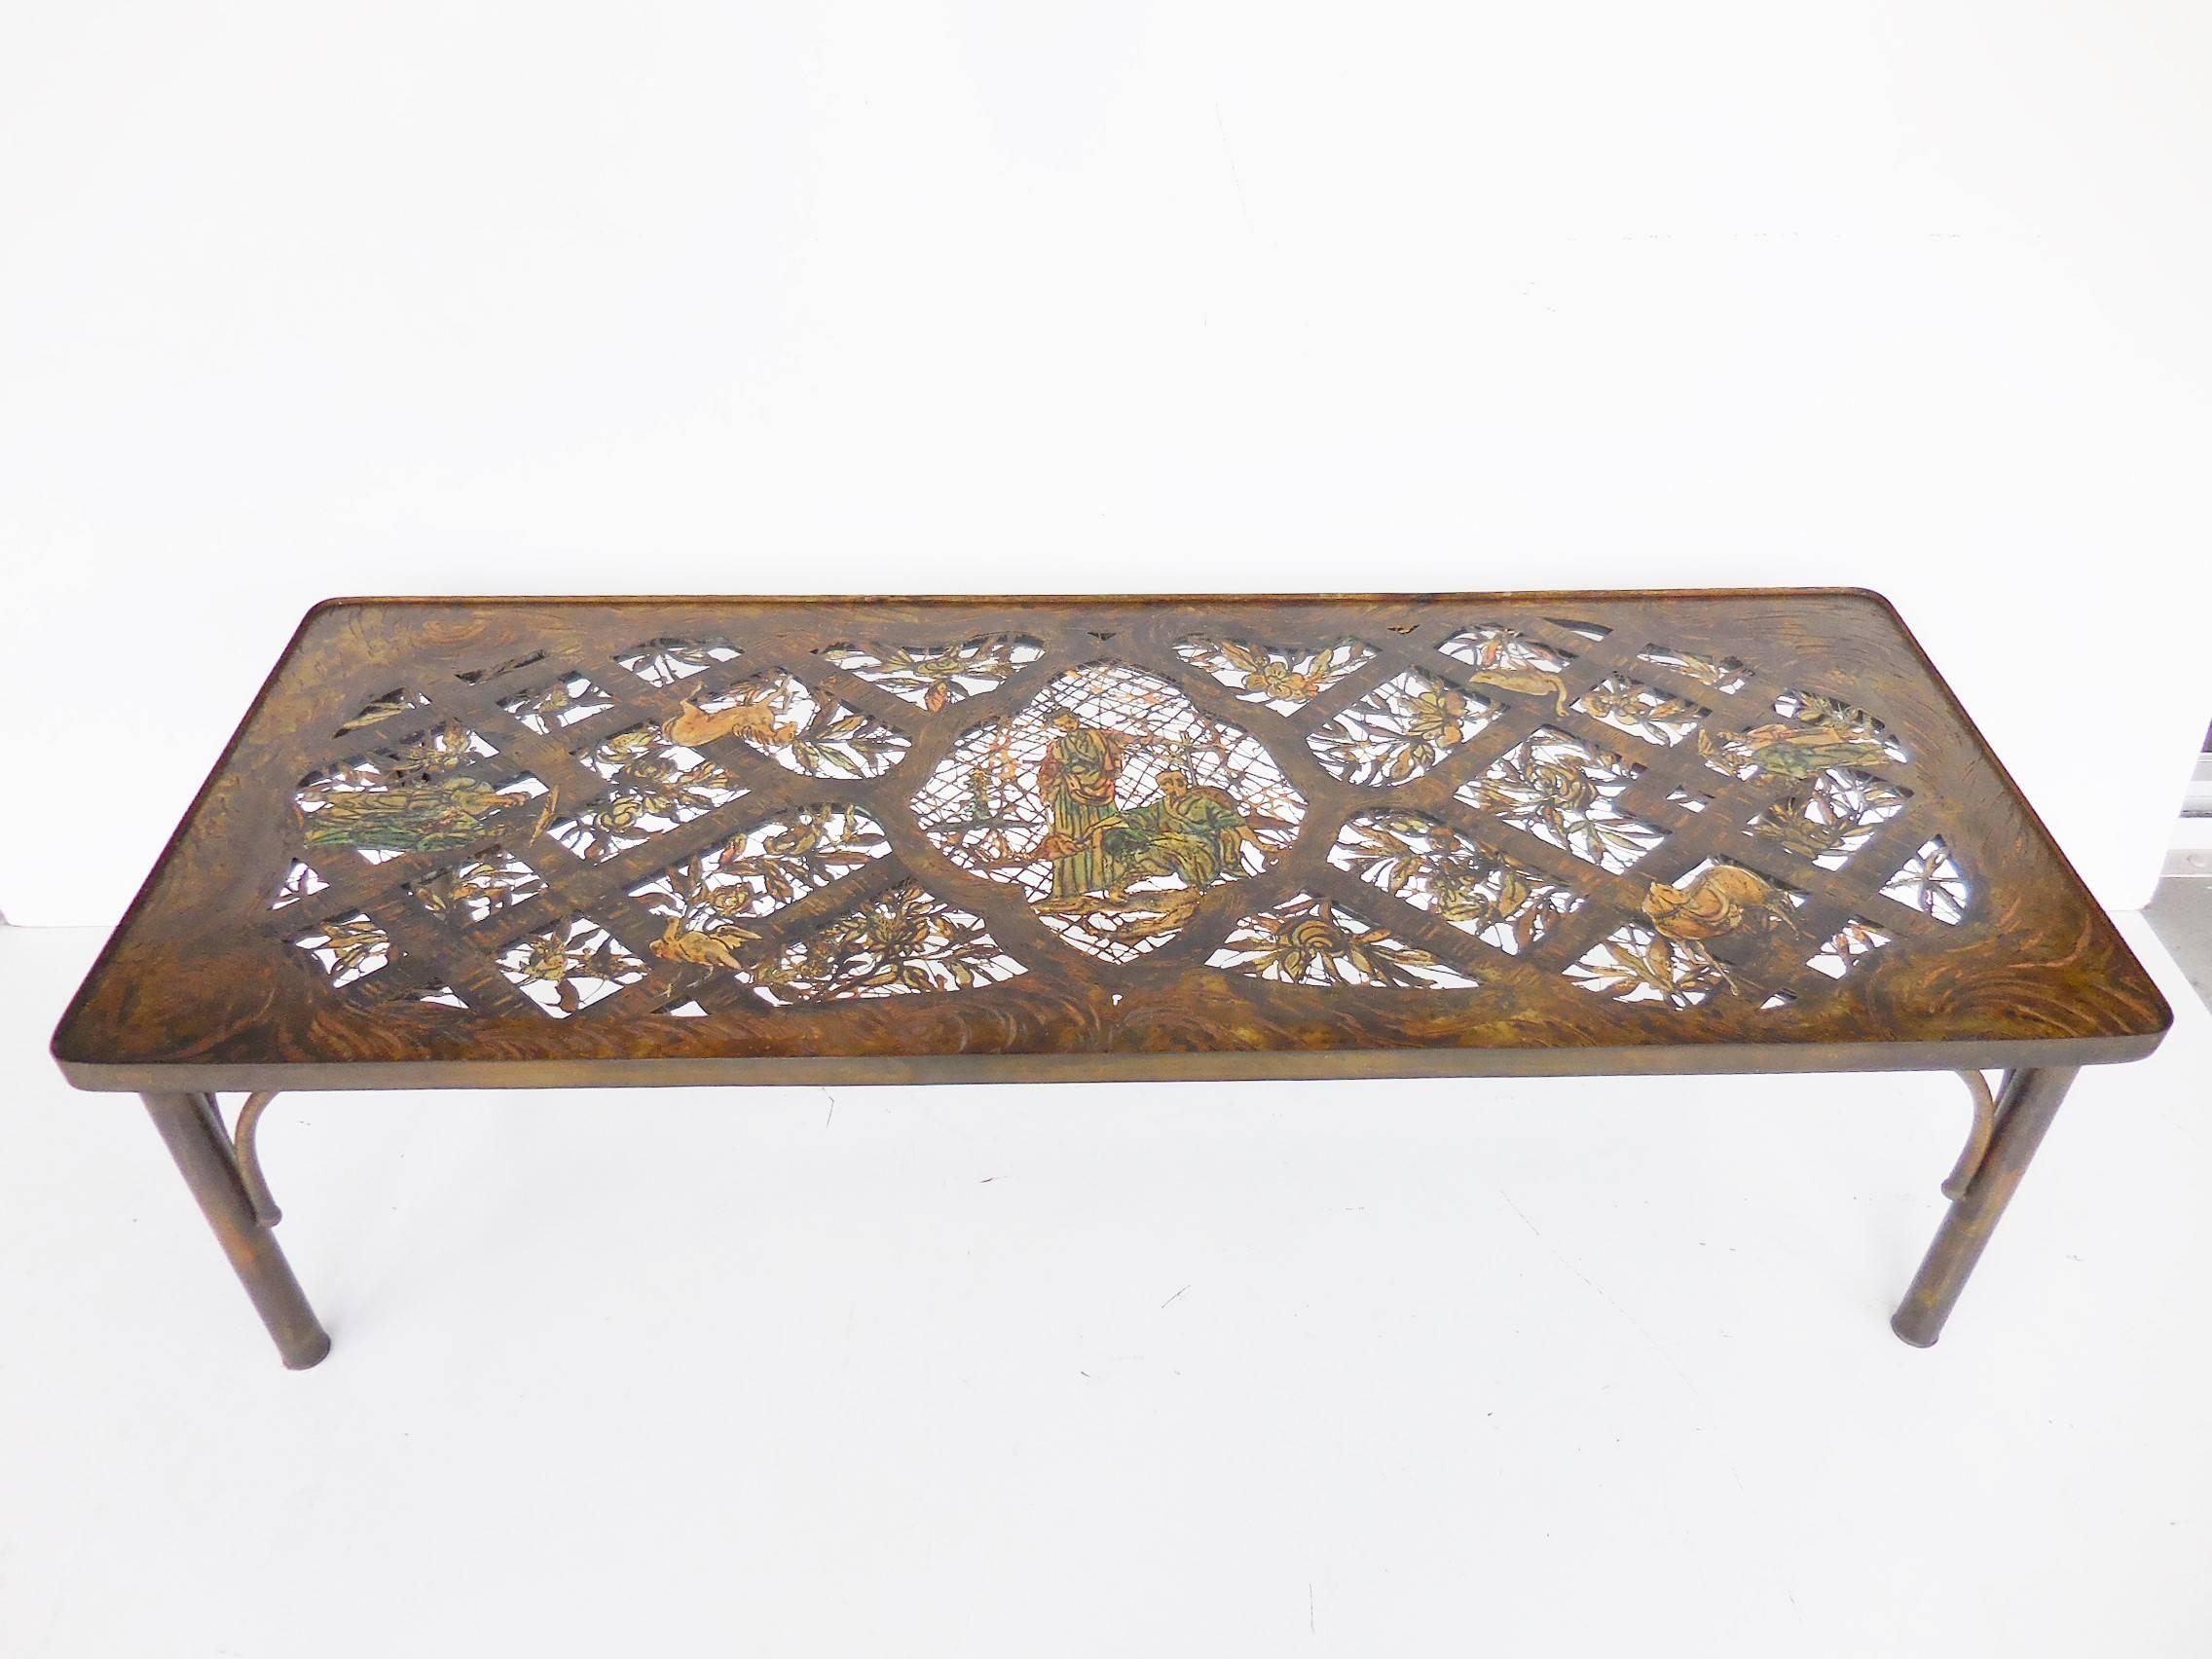 American Rare Philip and Kelvin LaVerne Coffee Table, Bronze and Enamel